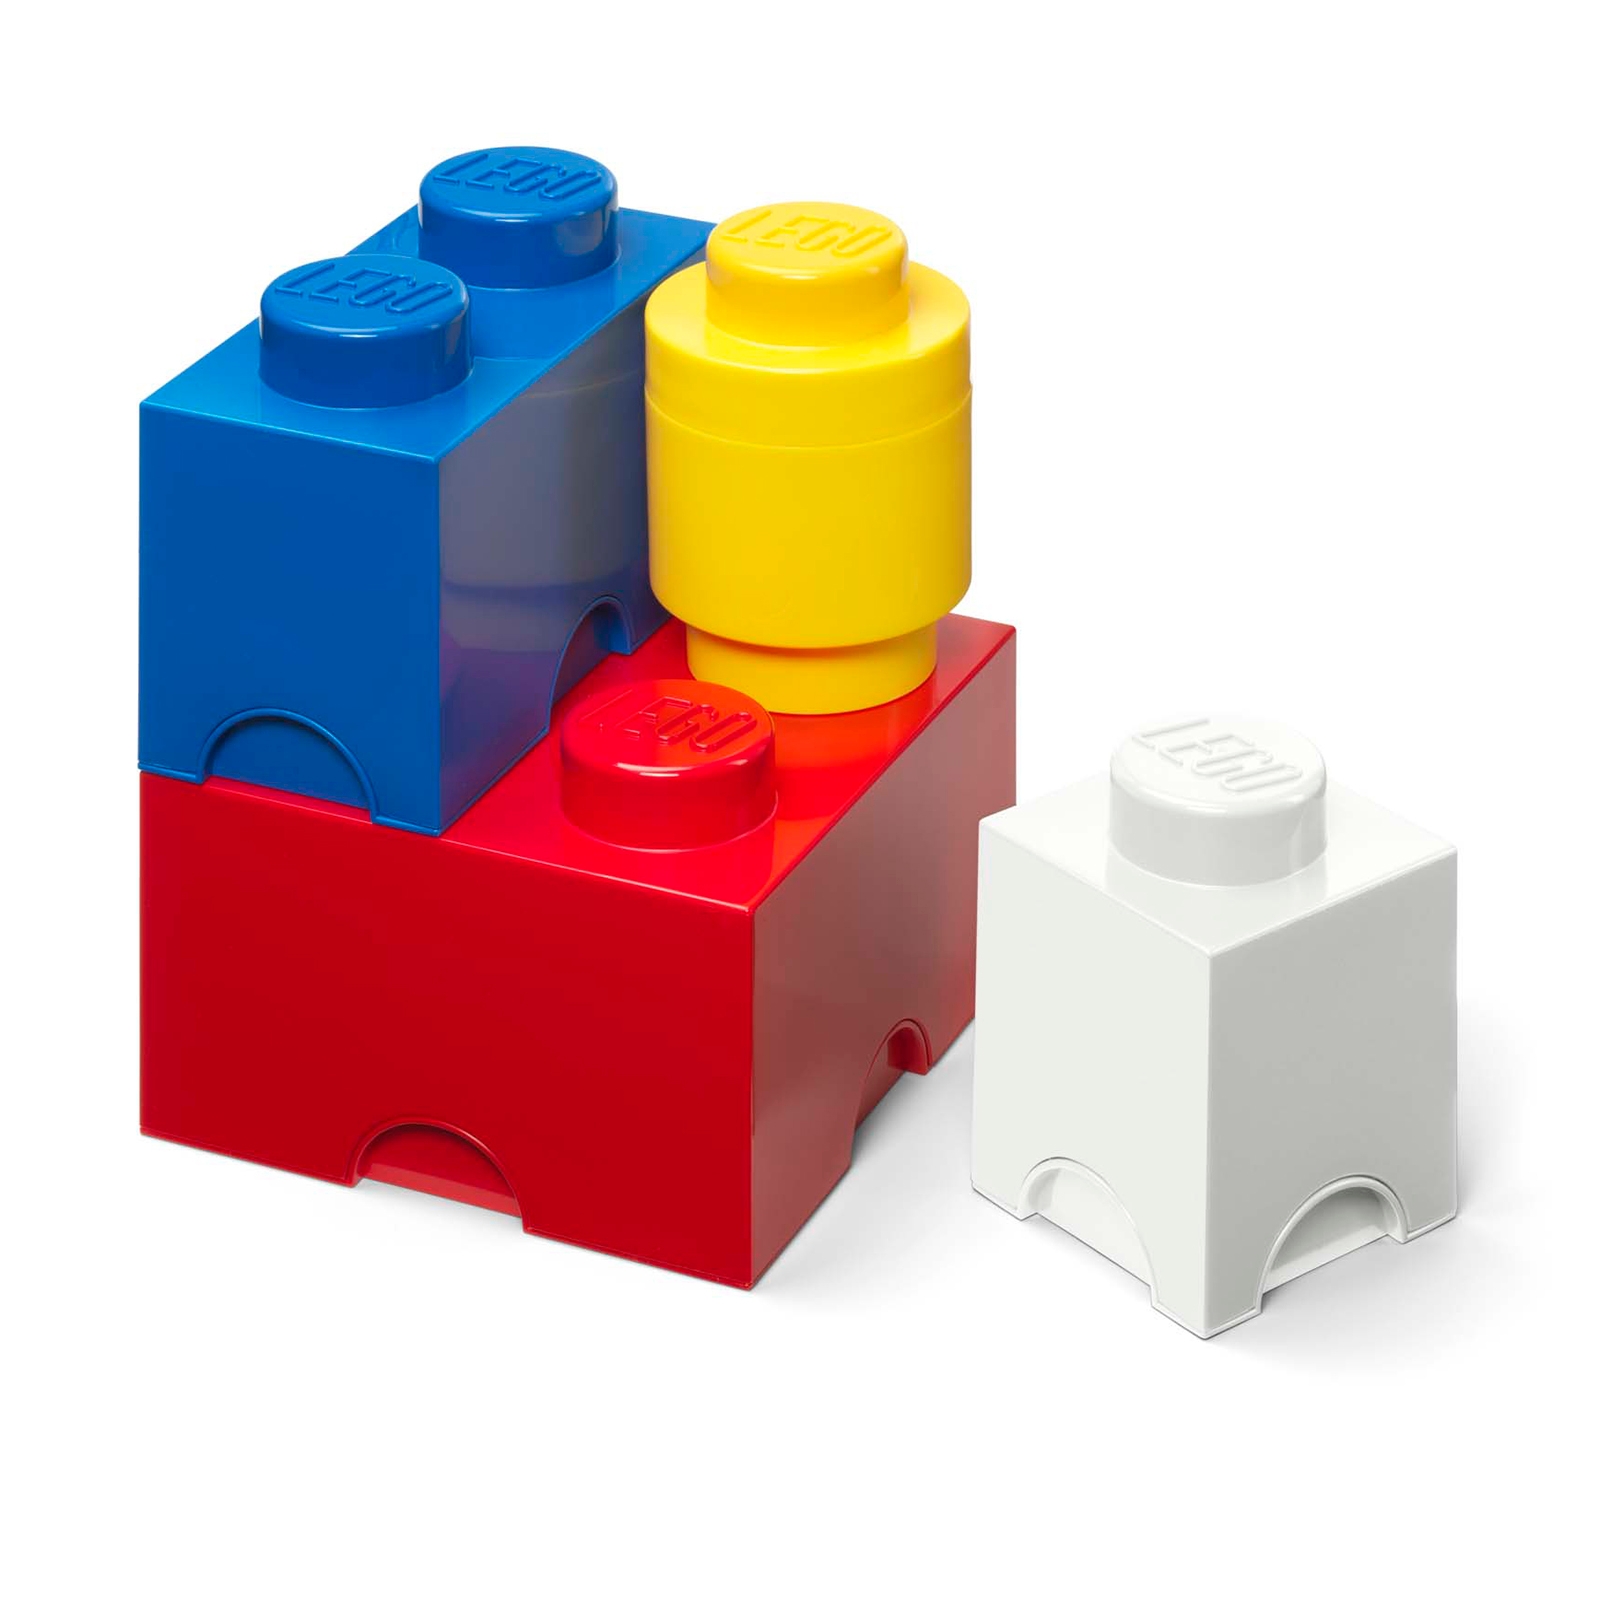 LEGO Multi-Pack 4 Piece Storage Boxes - Classic